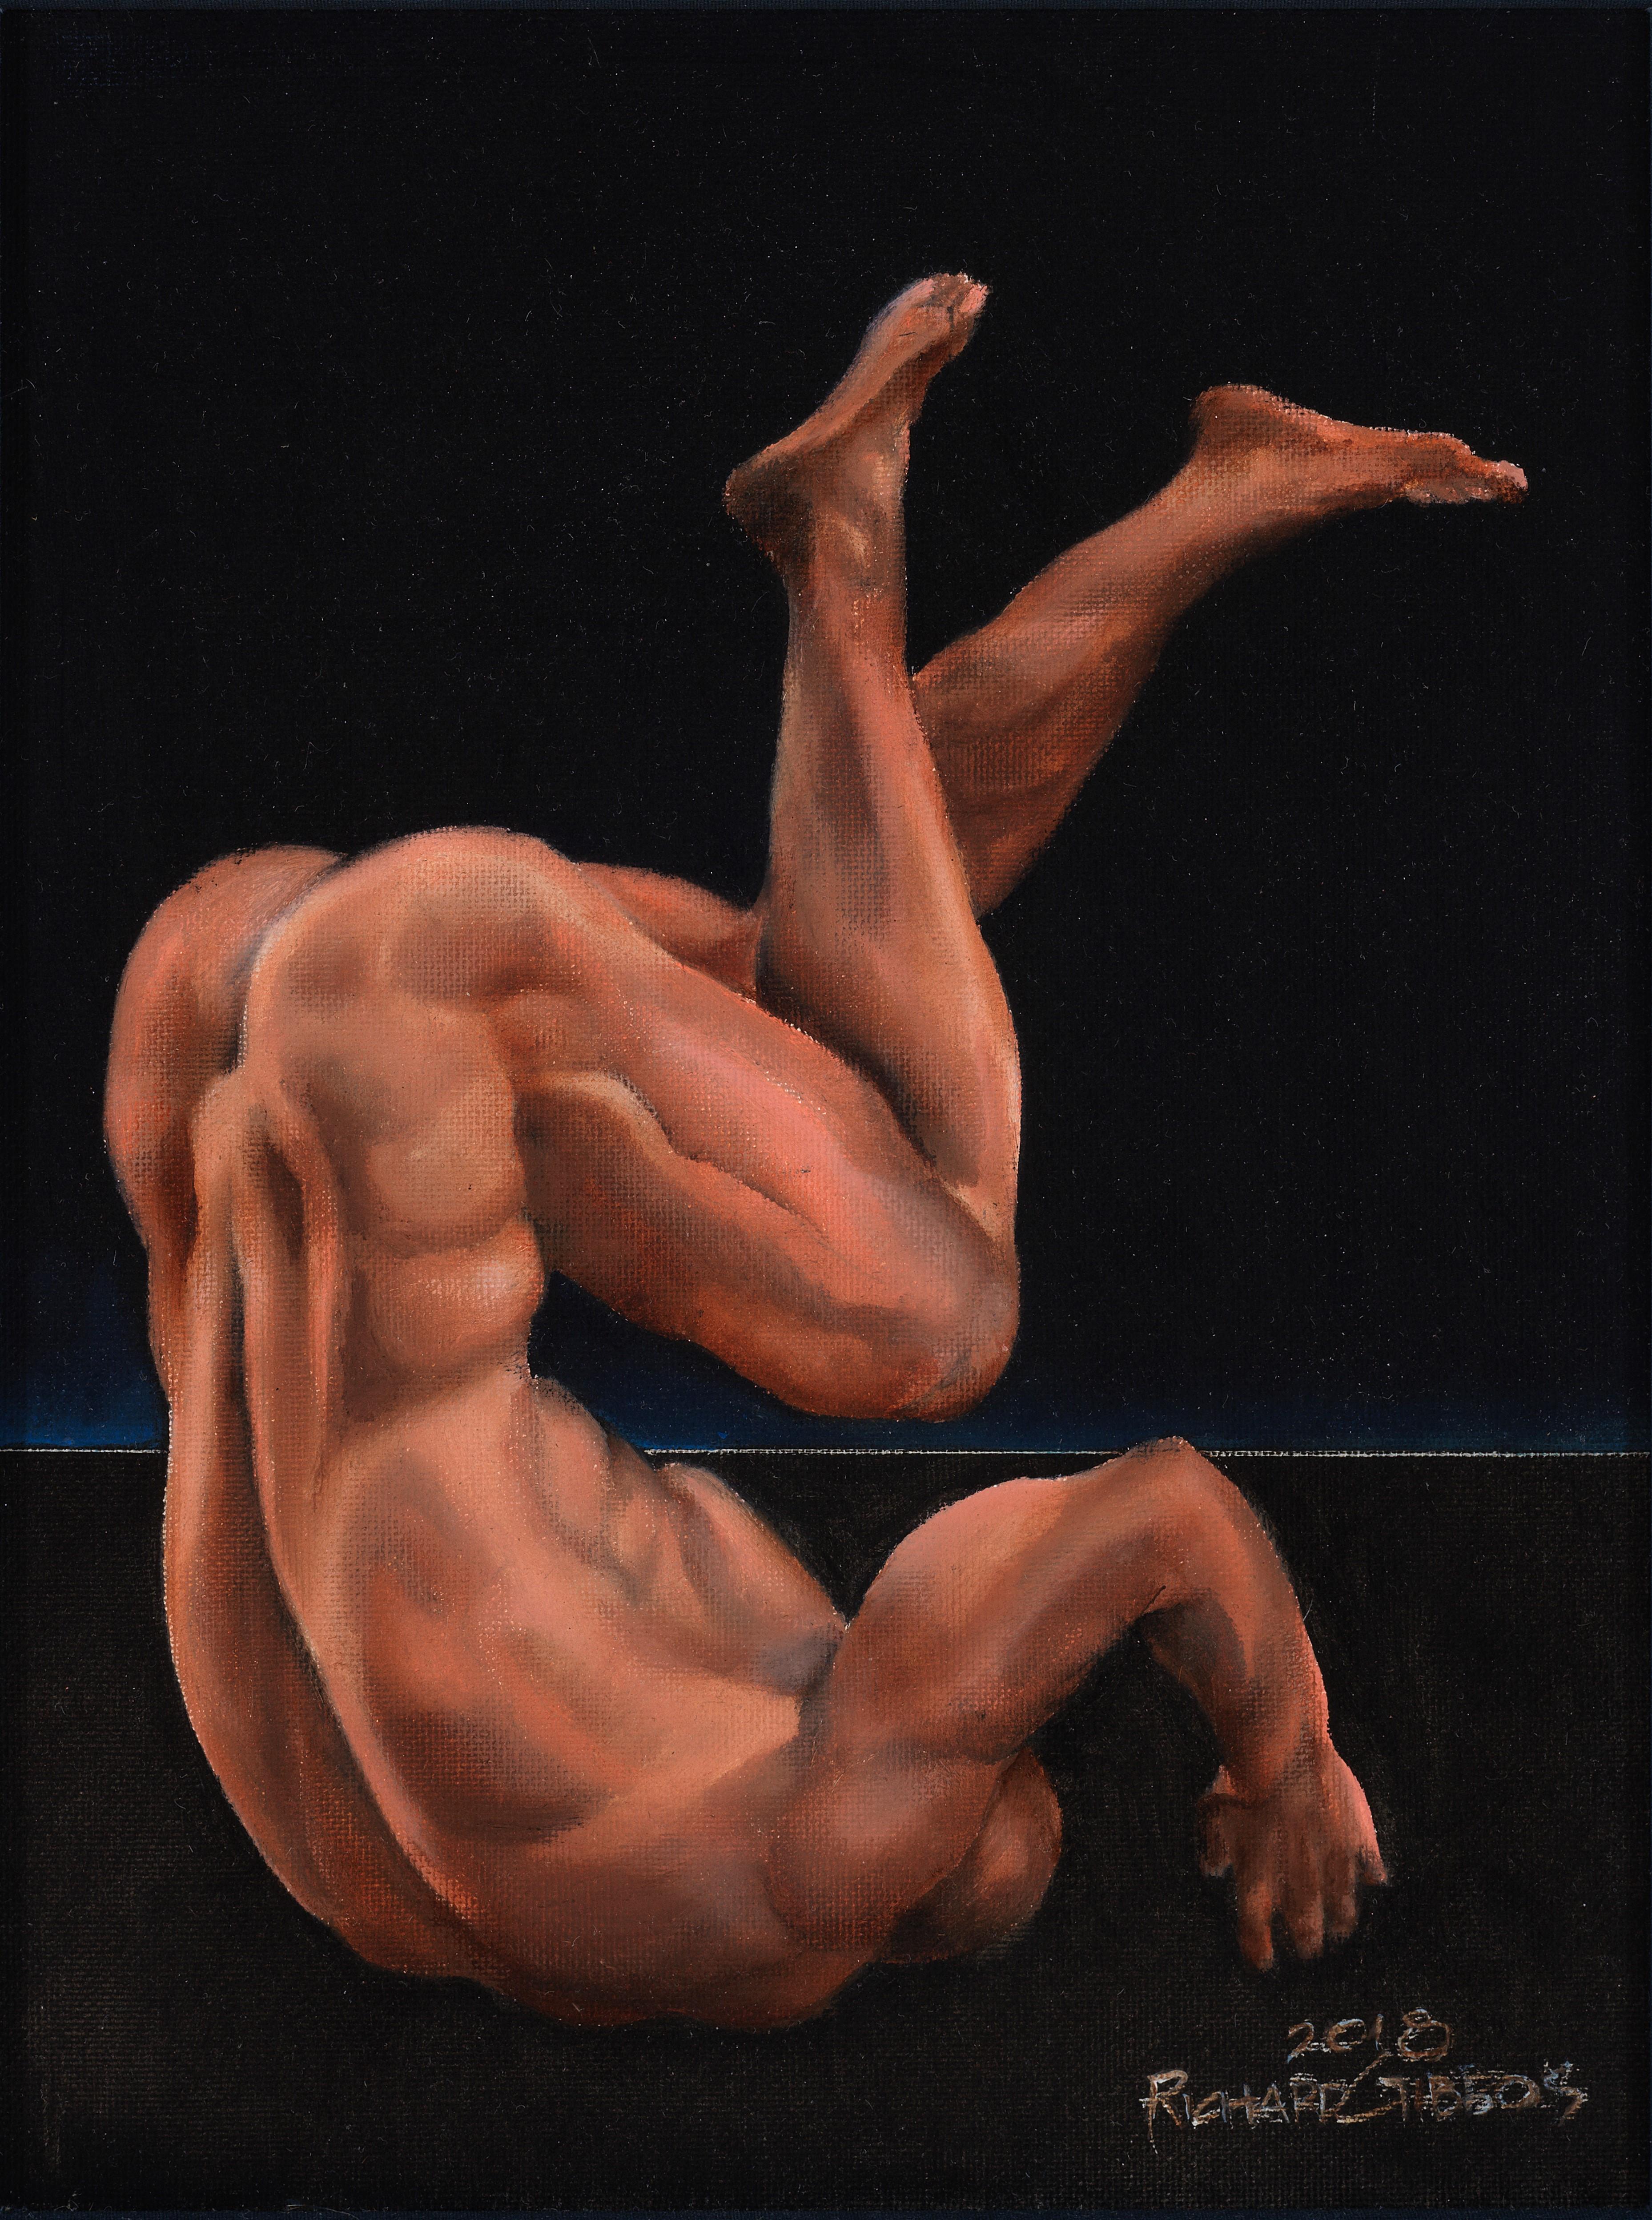 Icarus - Nude Male Tumbling Downward on Black Background, Oil on Panel - Painting by Richard Gibbons